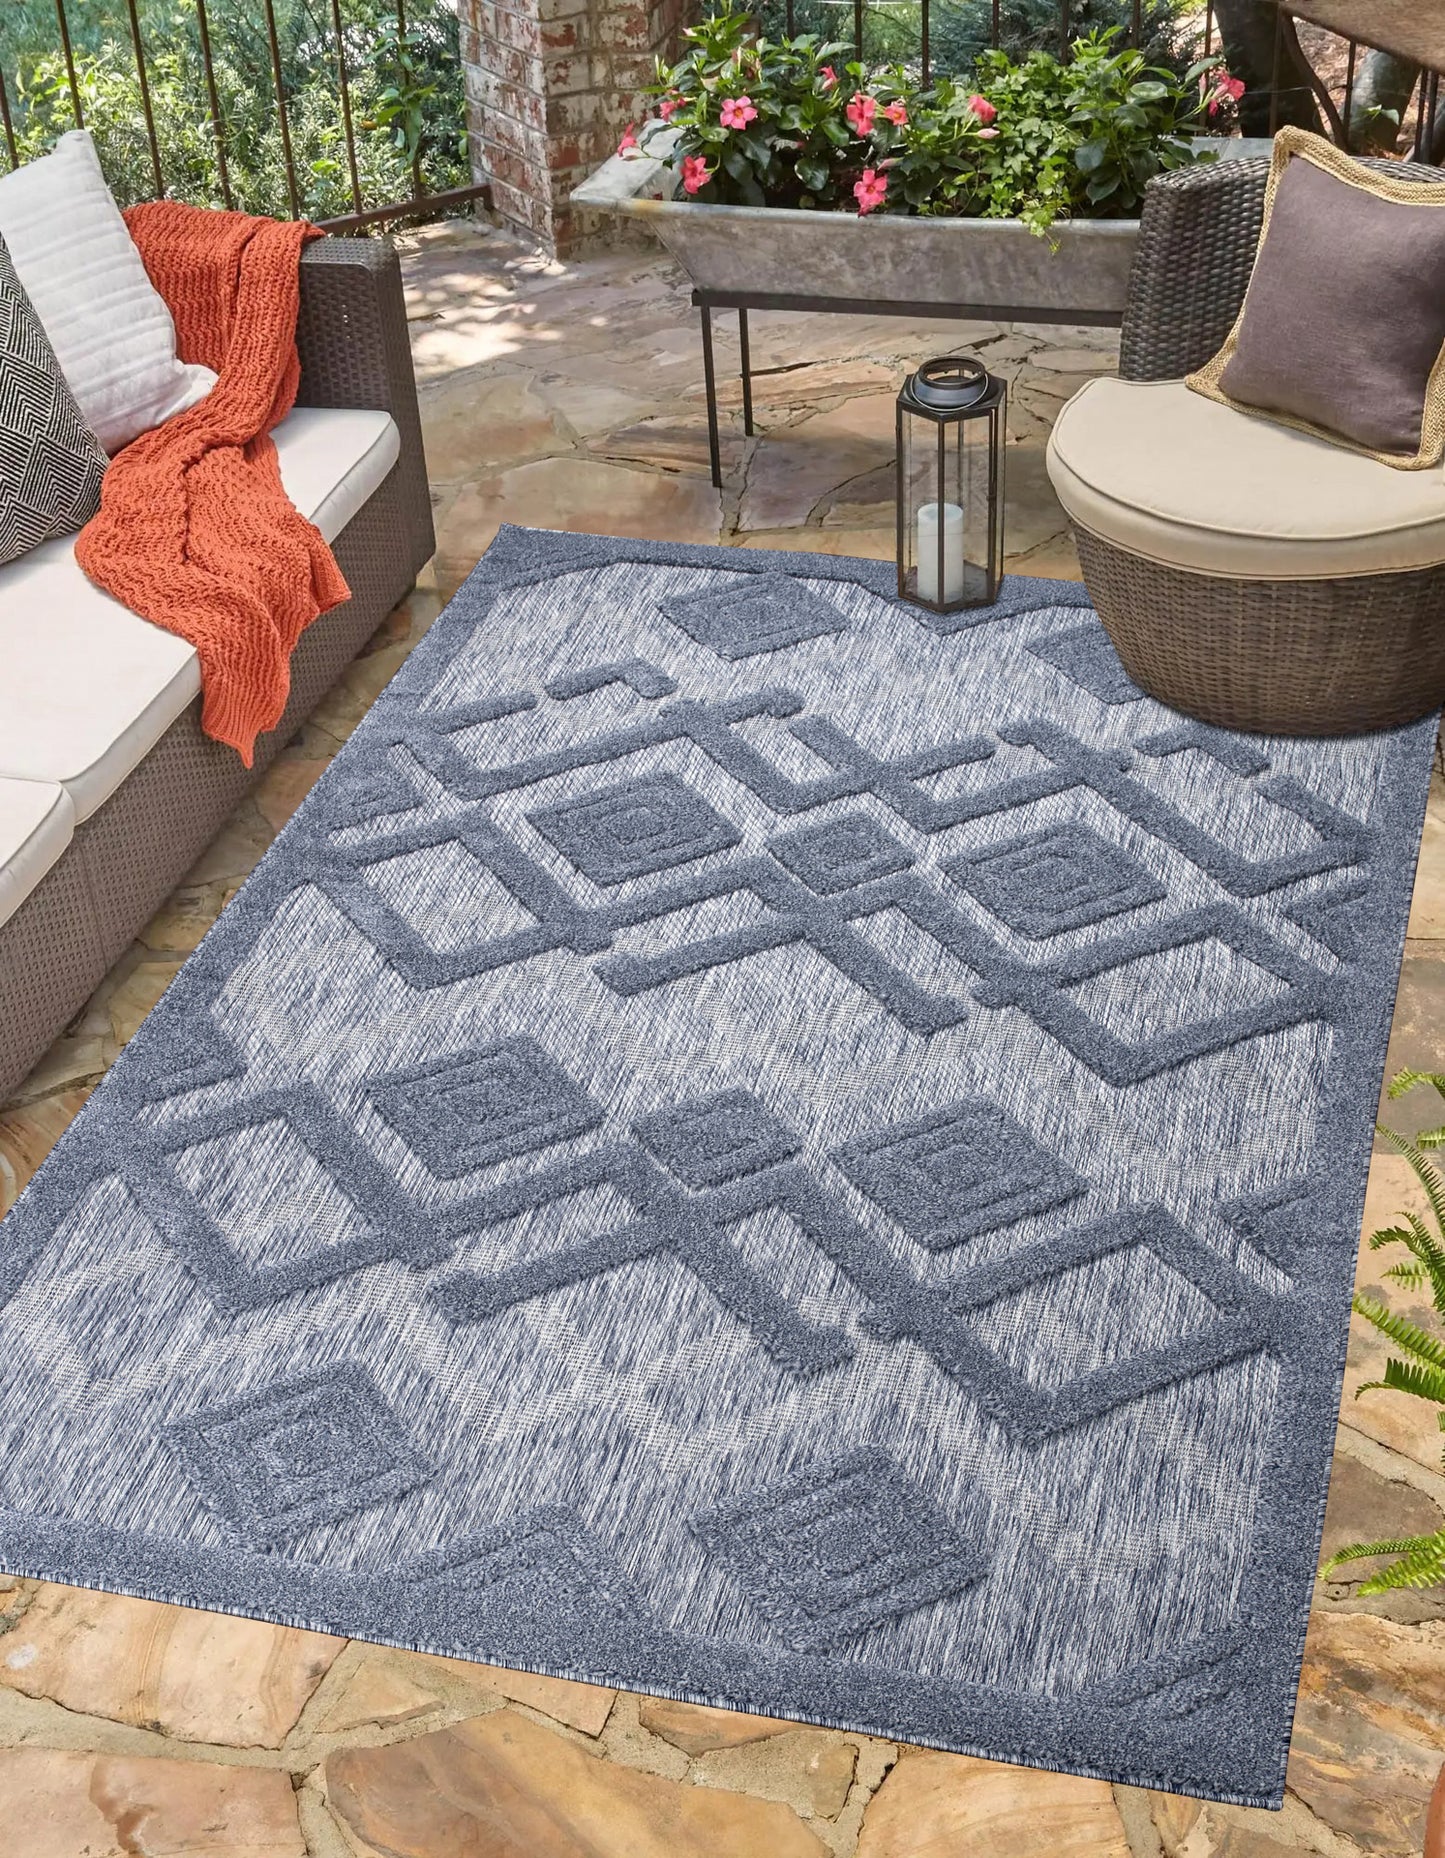 geometric modern minimalist contemporary outdoor indoor area rug carpet for patio porch dining area balcony living room bedroom 2x8, 3x10, 2x10 ft Long Runner Rug, Hallway, Balcony, Entry Way, Kitchen, Stairs